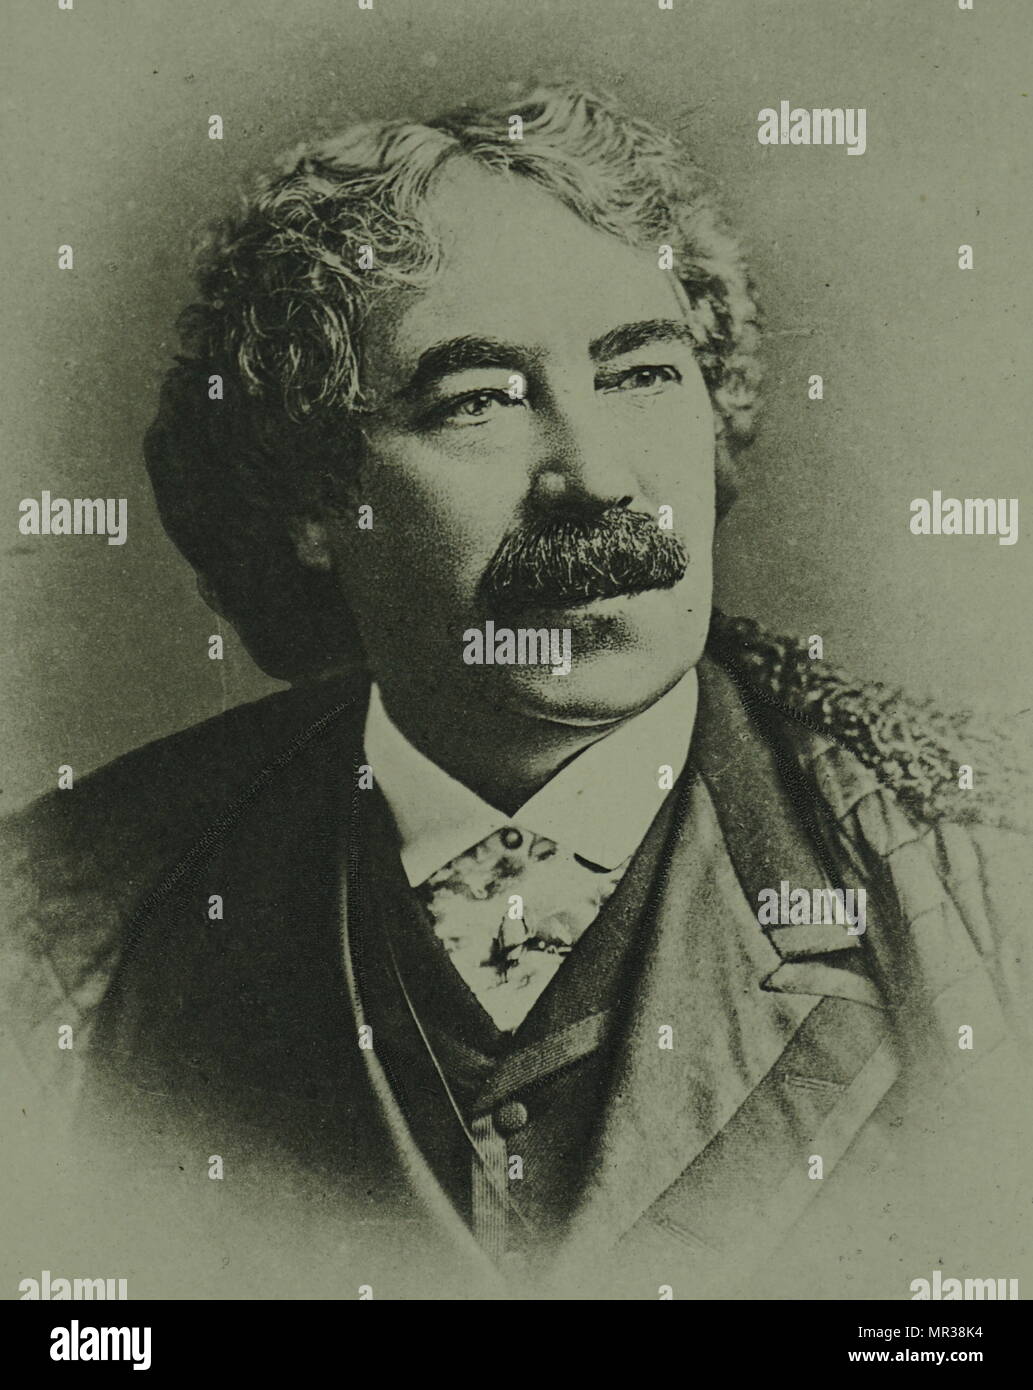 Photographic portrait of Sims Reeves (1821-1900) an English operatic, ontorio and ballad tenor vocalist of the mid-Victorian era. Dated 19th century Stock Photo